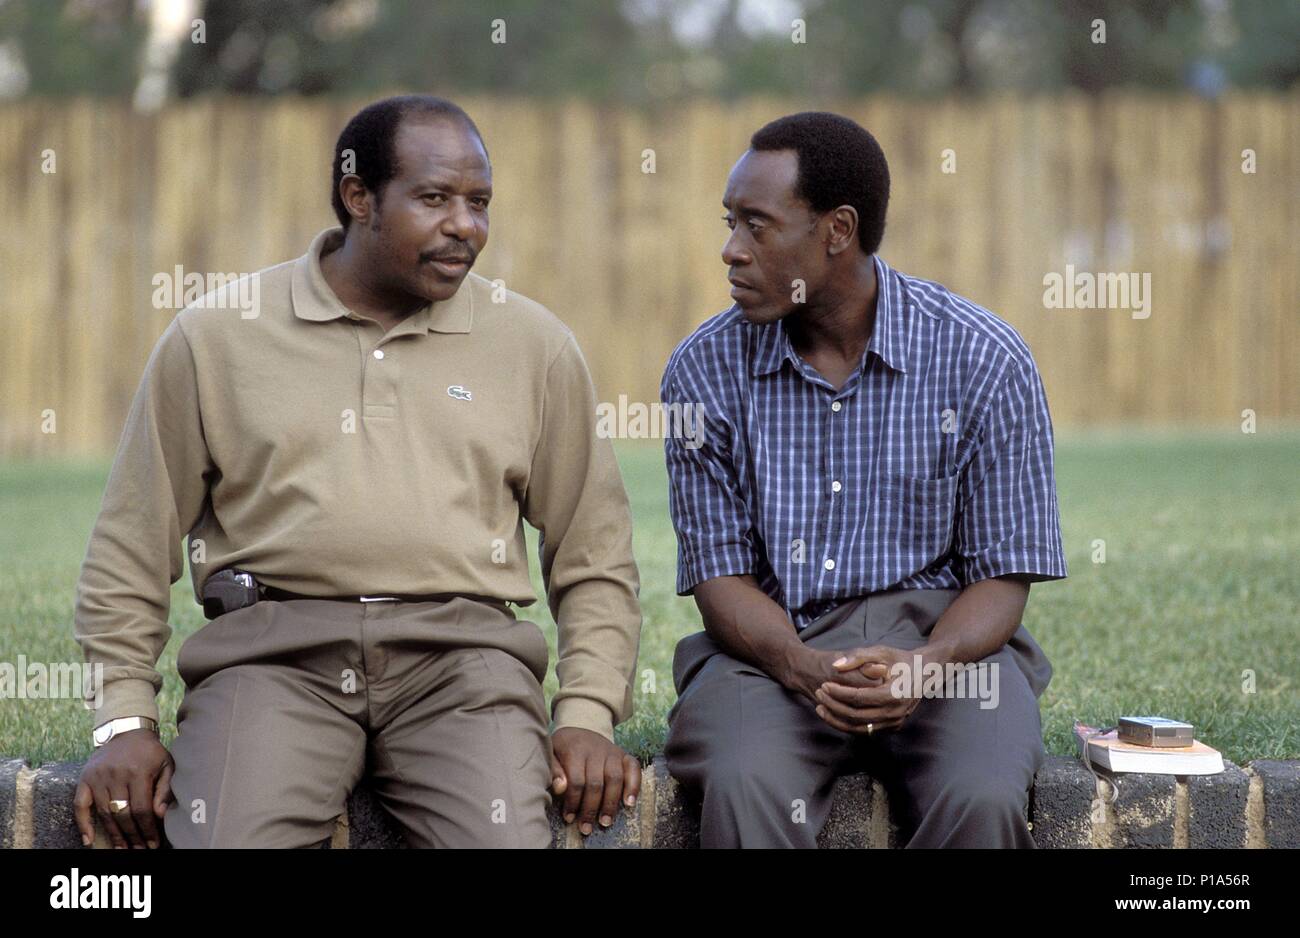 Original Film Title: HÔTEL RWANDA.  English Title: HÔTEL RWANDA.  Film Director: TERRY GEORGE.  Year: 2004.  Stars: DON CHEADLE; PAUL RUSESABAGINA. Copyright: Editorial inside use only. This is a publicly distributed handout. Access rights only, no license of copyright provided. Mandatory authorization to Visual Icon (www.visual-icon.com) is required for the reproduction of this image. Credit: UNITED ARTISTS / CONNOR, FRANK / Album Stock Photo